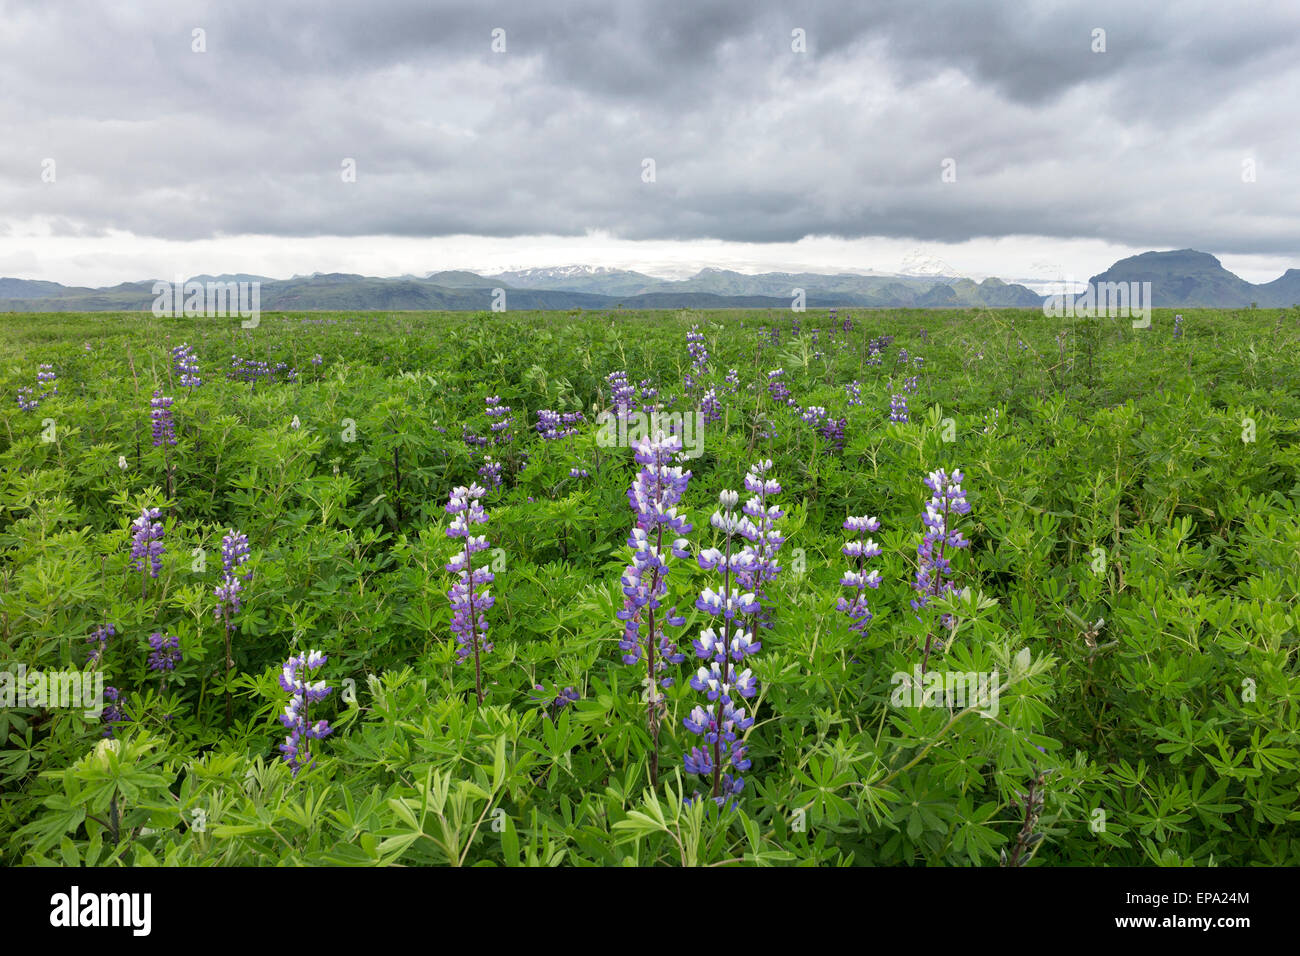 Lupins Lupinus nootkatensis Also Known as the Nootka Lupin Growing on the Flood Plain of the Katla Volcano Iceland Stock Photo